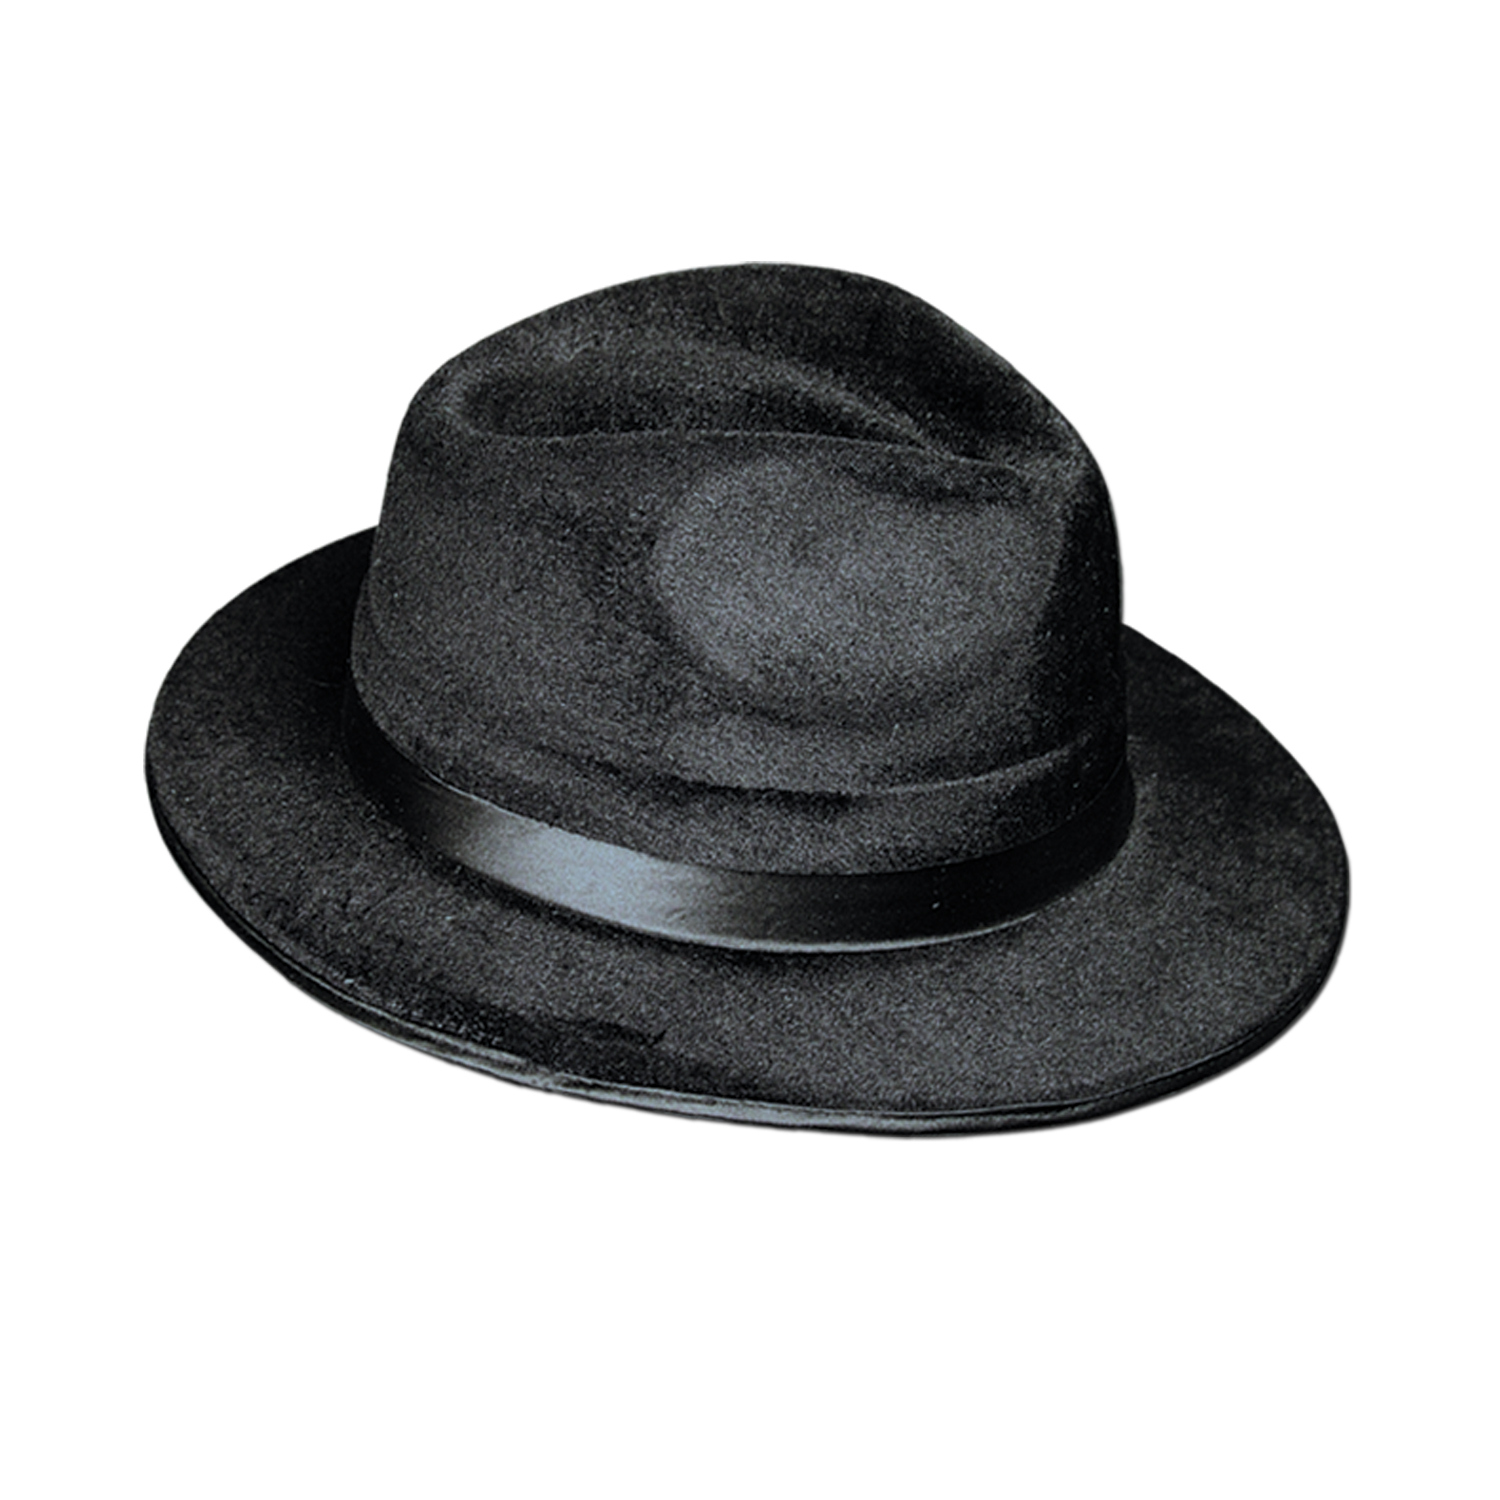 Plastic molded black fedora with a velour coating and a silk like band.